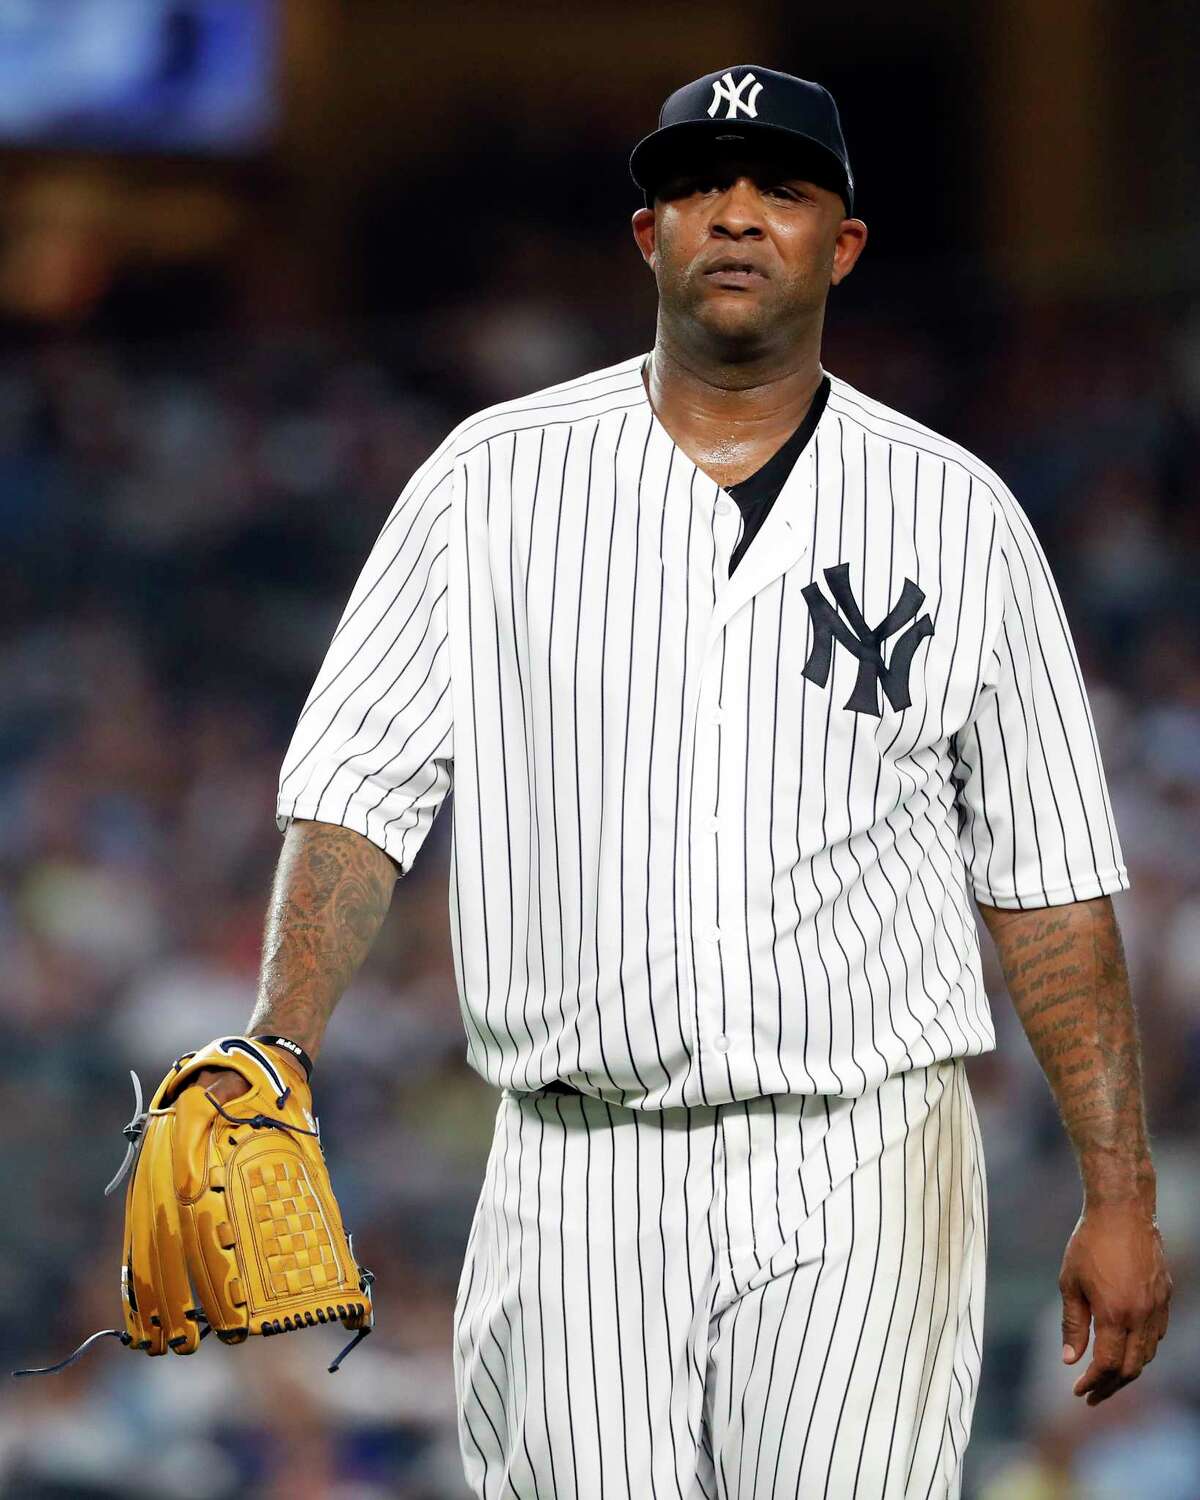 NEW YORK, NY - AUGUST 29: CC Sabathia #52 of the New York Yankees walks back to the dugout against the Chicago White Sox during the second inning at Yankee Stadium on August 29, 2018 in the Bronx borough of New York City. (Photo by Adam Hunger/Getty Images)